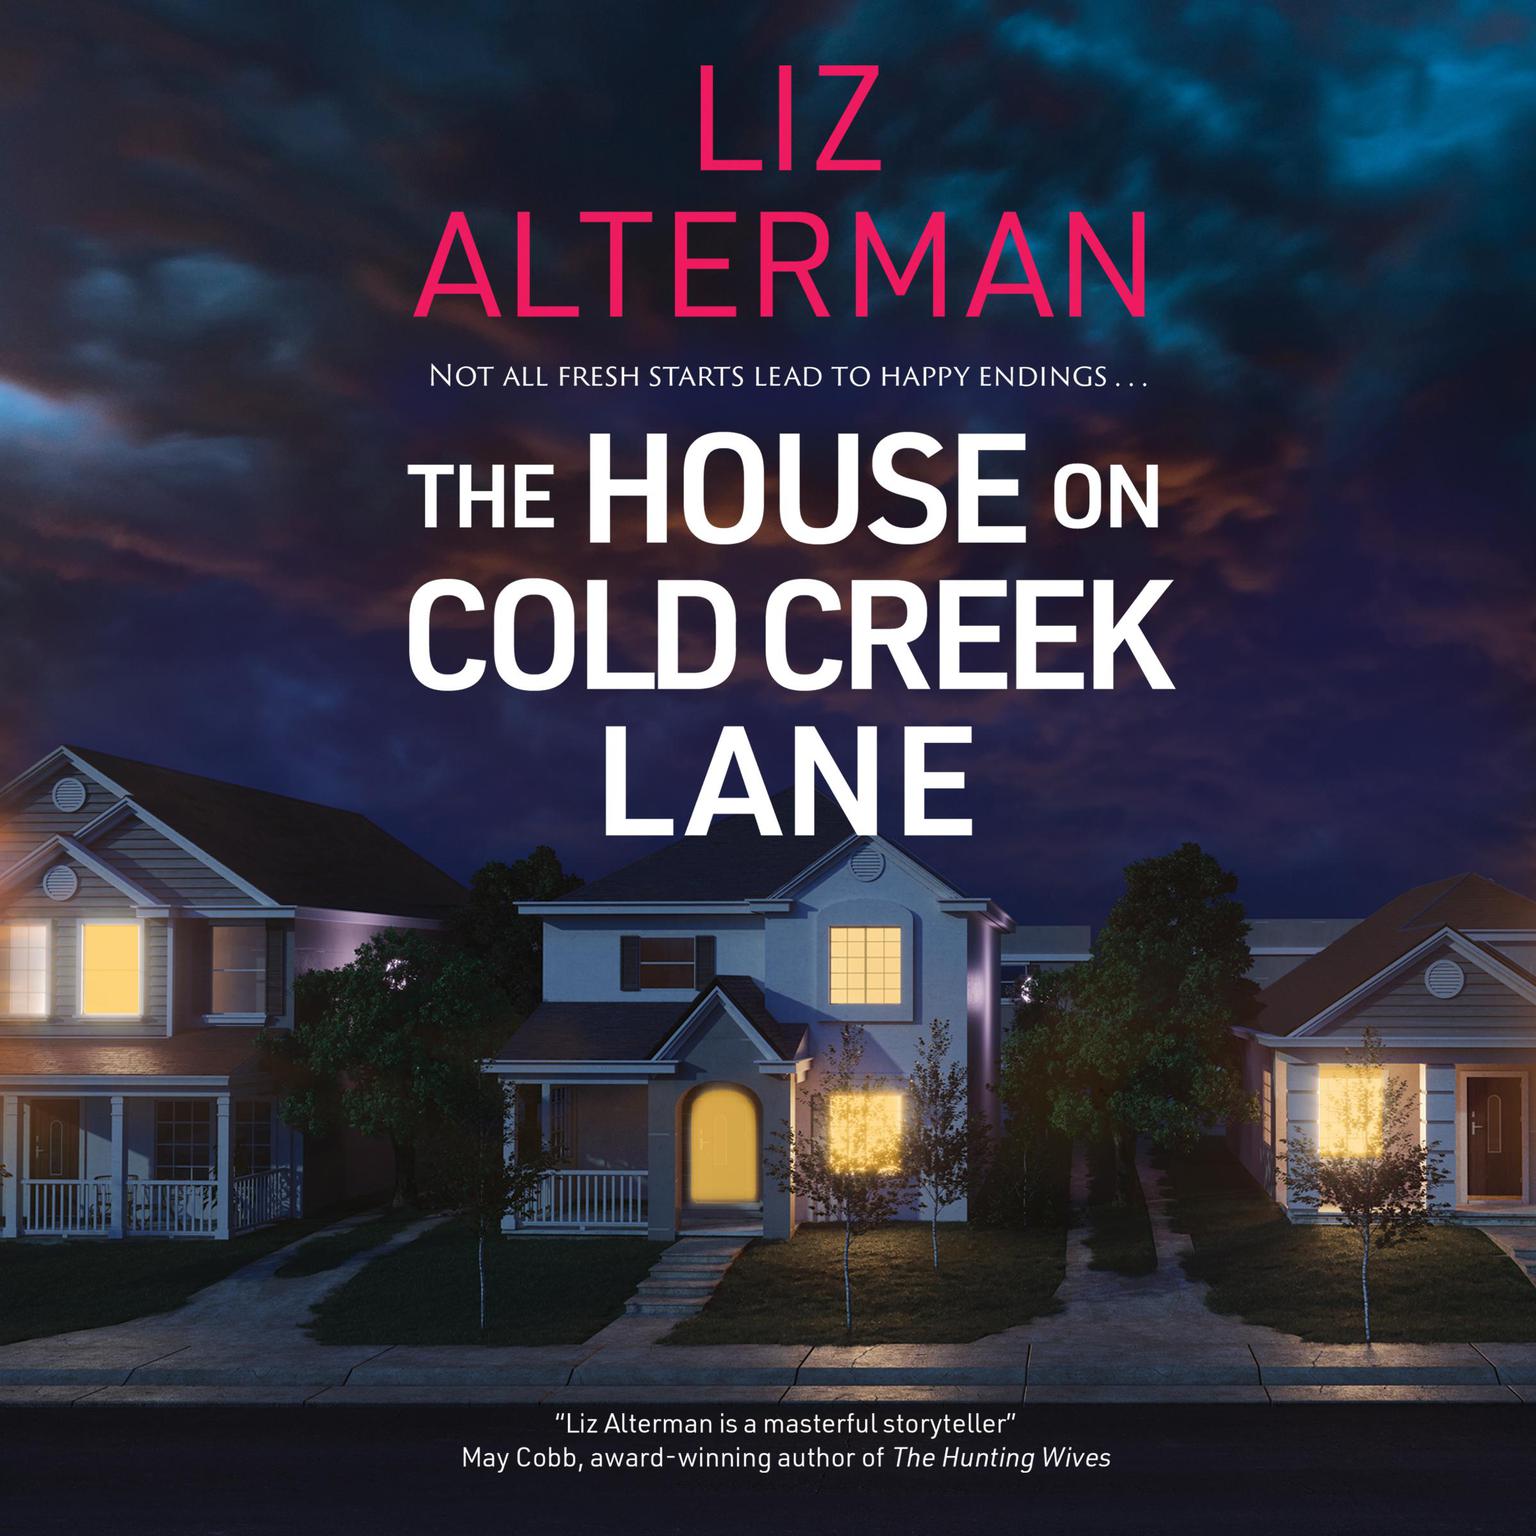 The House on Cold Creek Lane Audiobook, by Liz Alterman